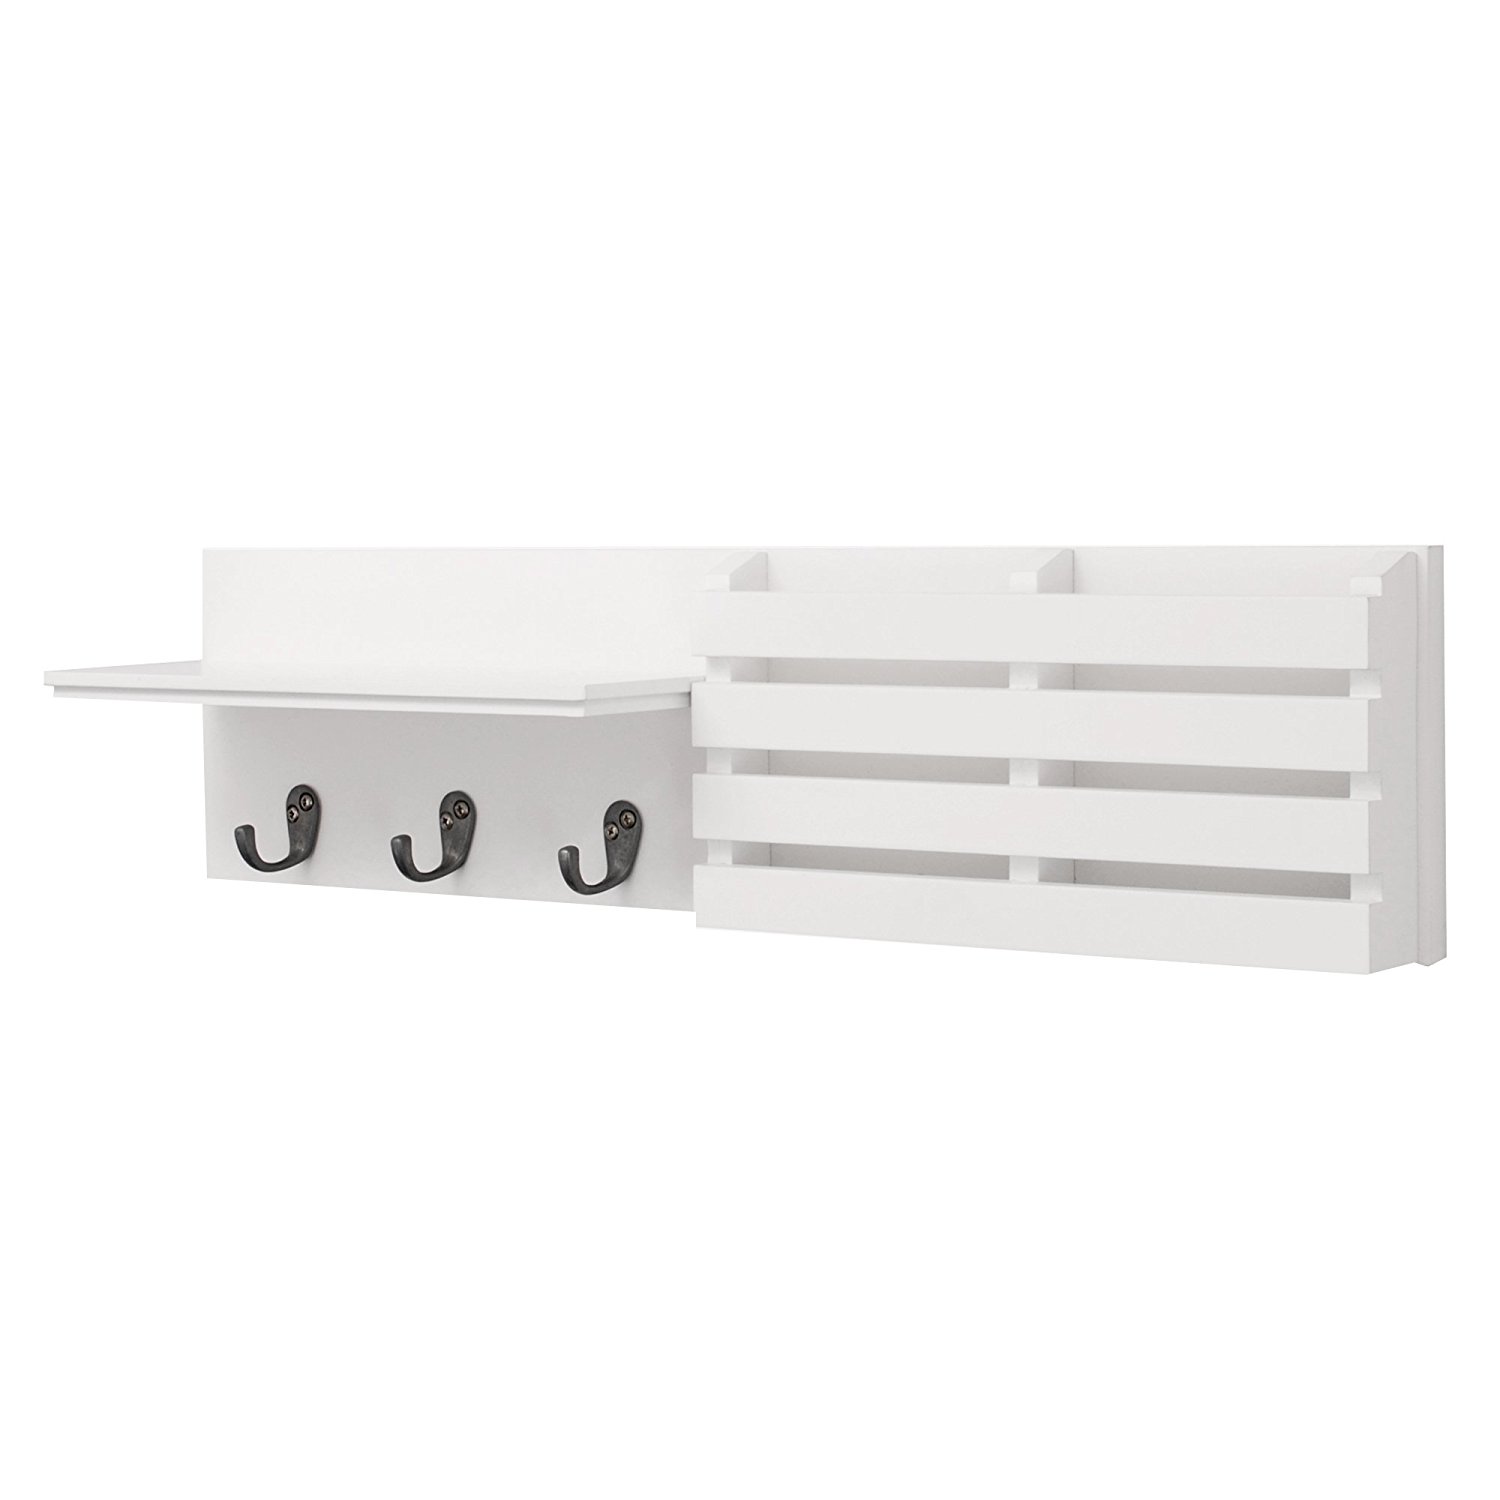 Kiera Grace Sydney Wall Shelf and Mail Holder with 3 Hooks, 24-Inch by 6-Inch, White